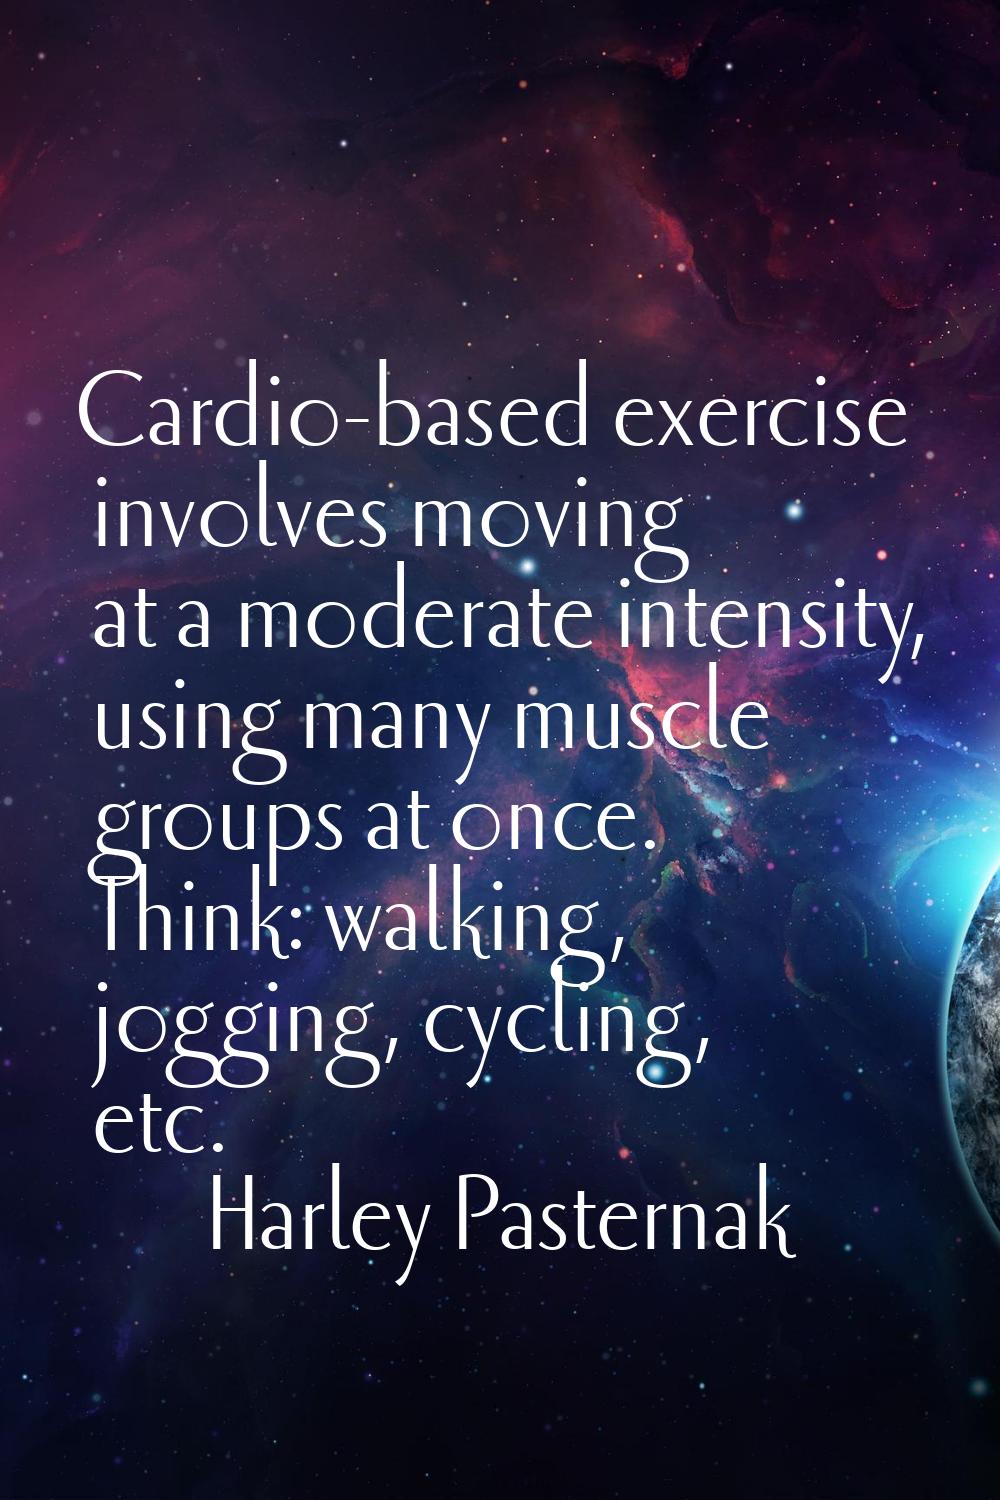 Cardio-based exercise involves moving at a moderate intensity, using many muscle groups at once. Th